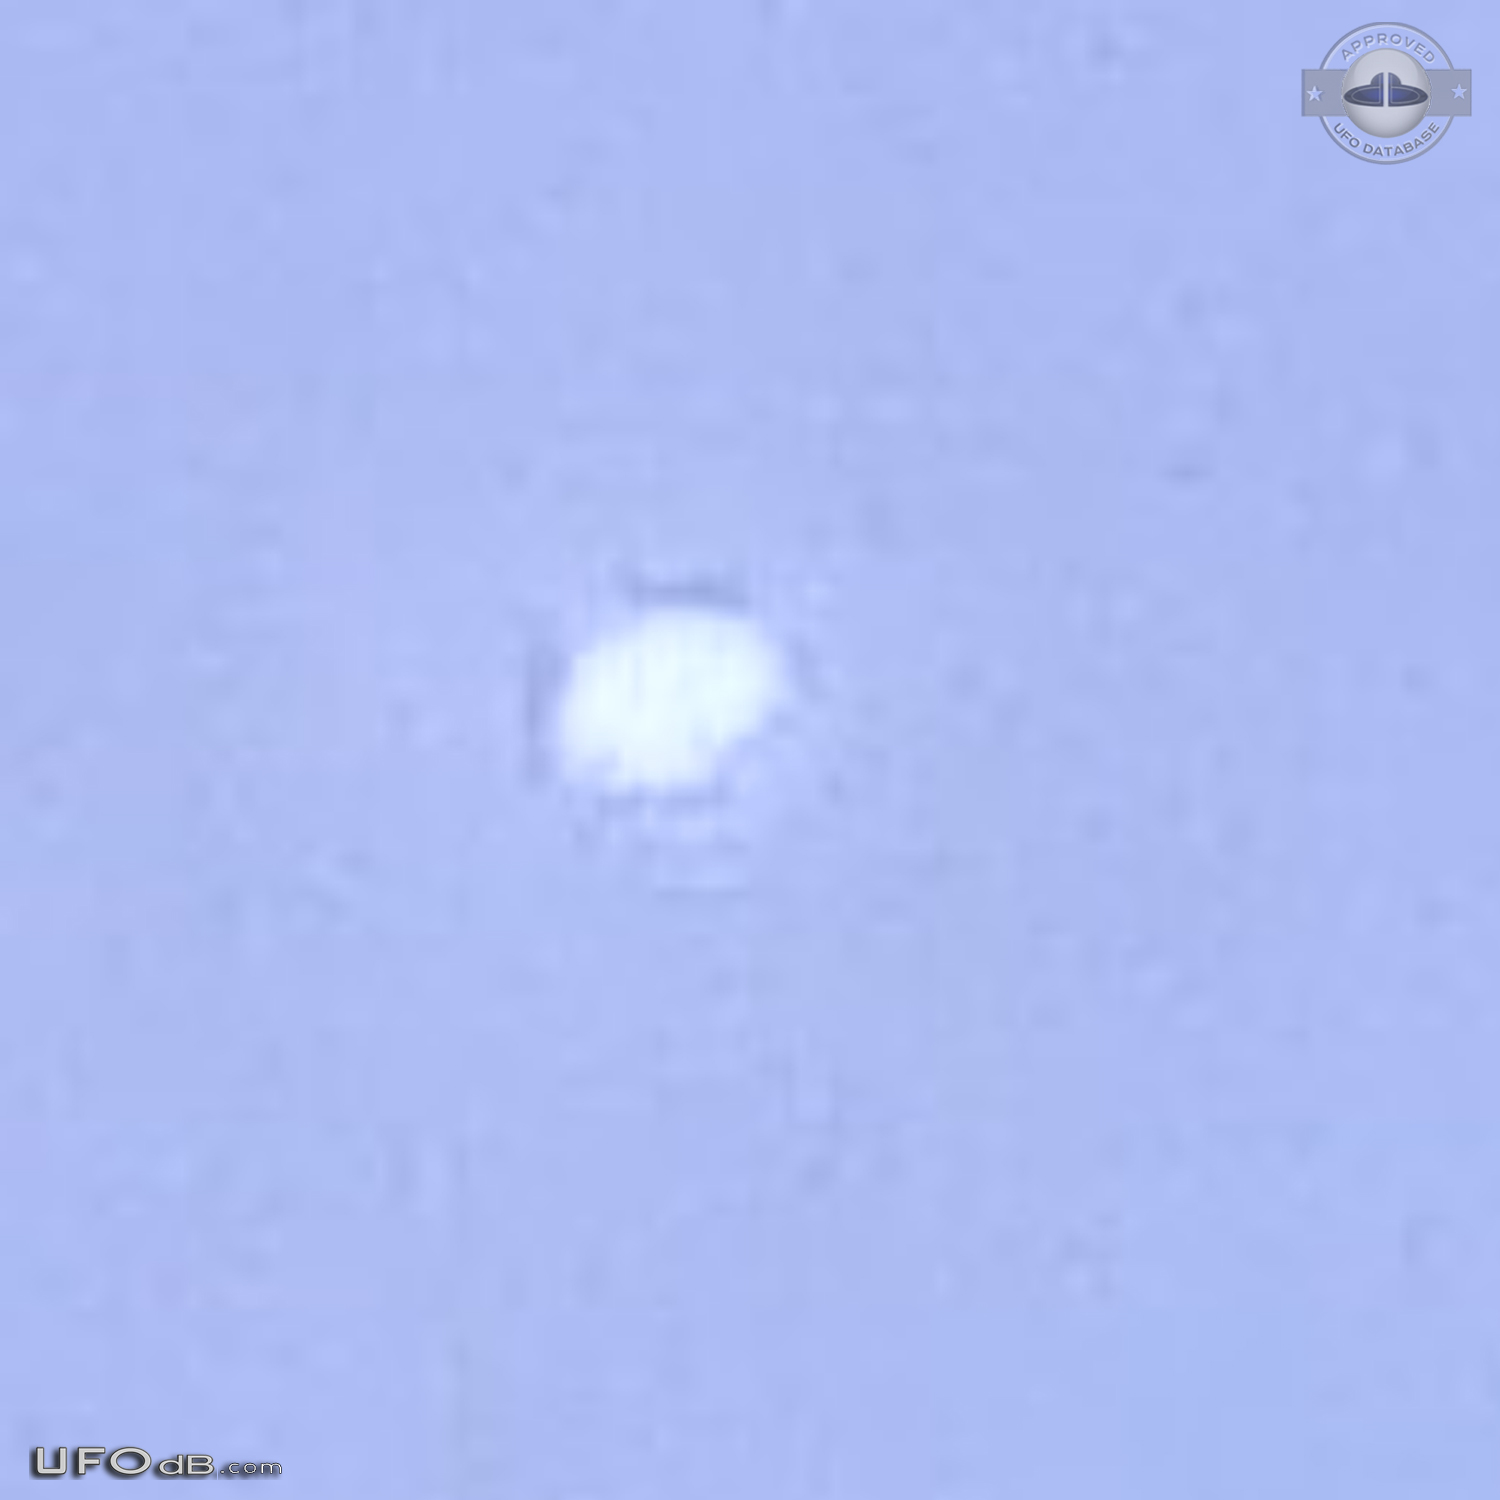 Star like ufo keeps hovering at one spot - Rotterdam Netherlands 2015 UFO Picture #726-5